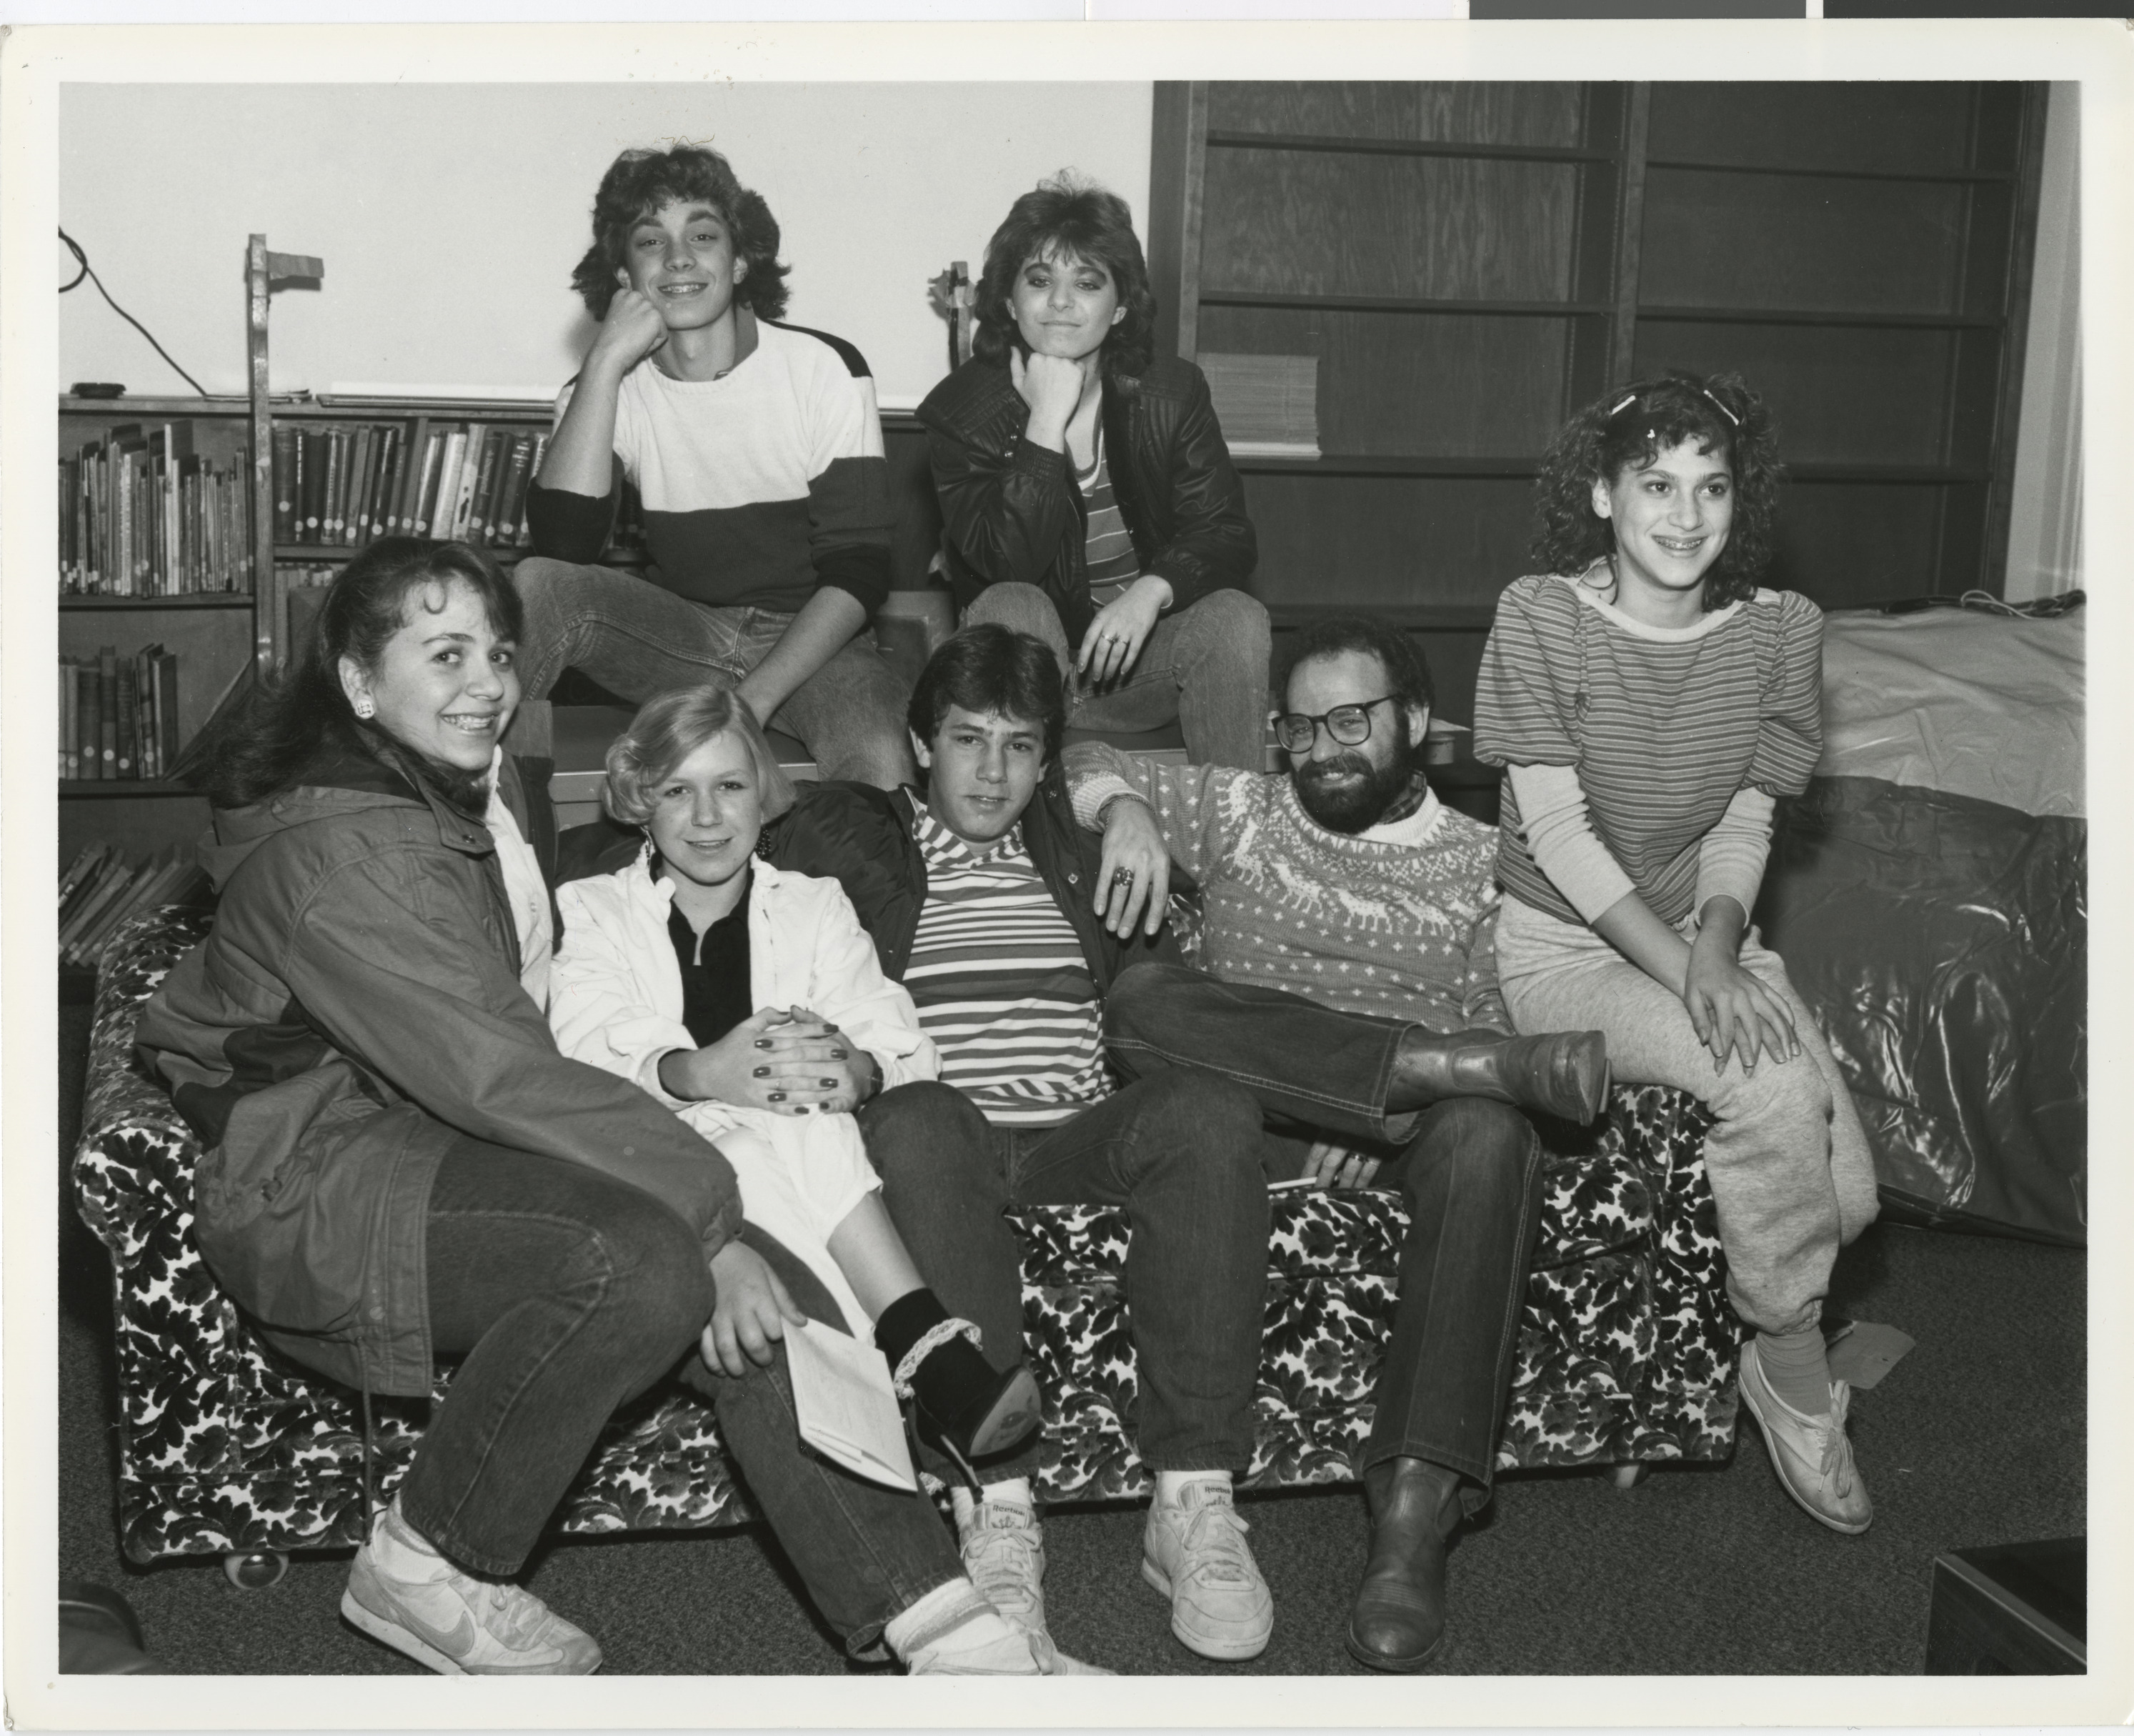 Photograph of U.S.Y. meeting group, 1980s